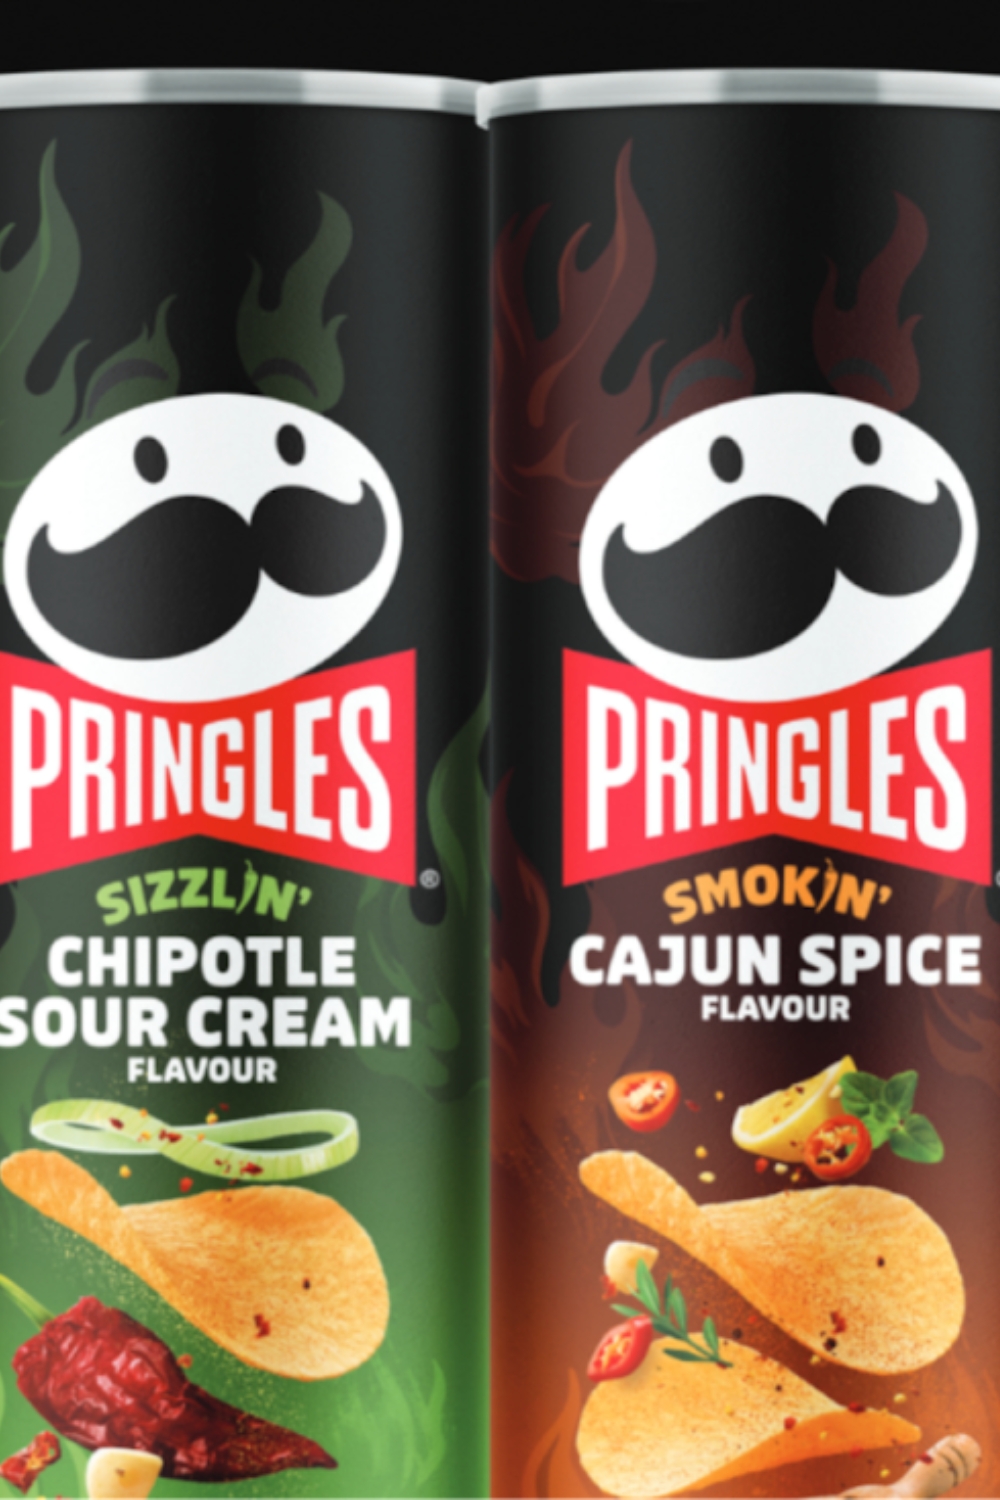 Pringles Just Teamed Up With Hot Ones For 3 Spicy New Flavors